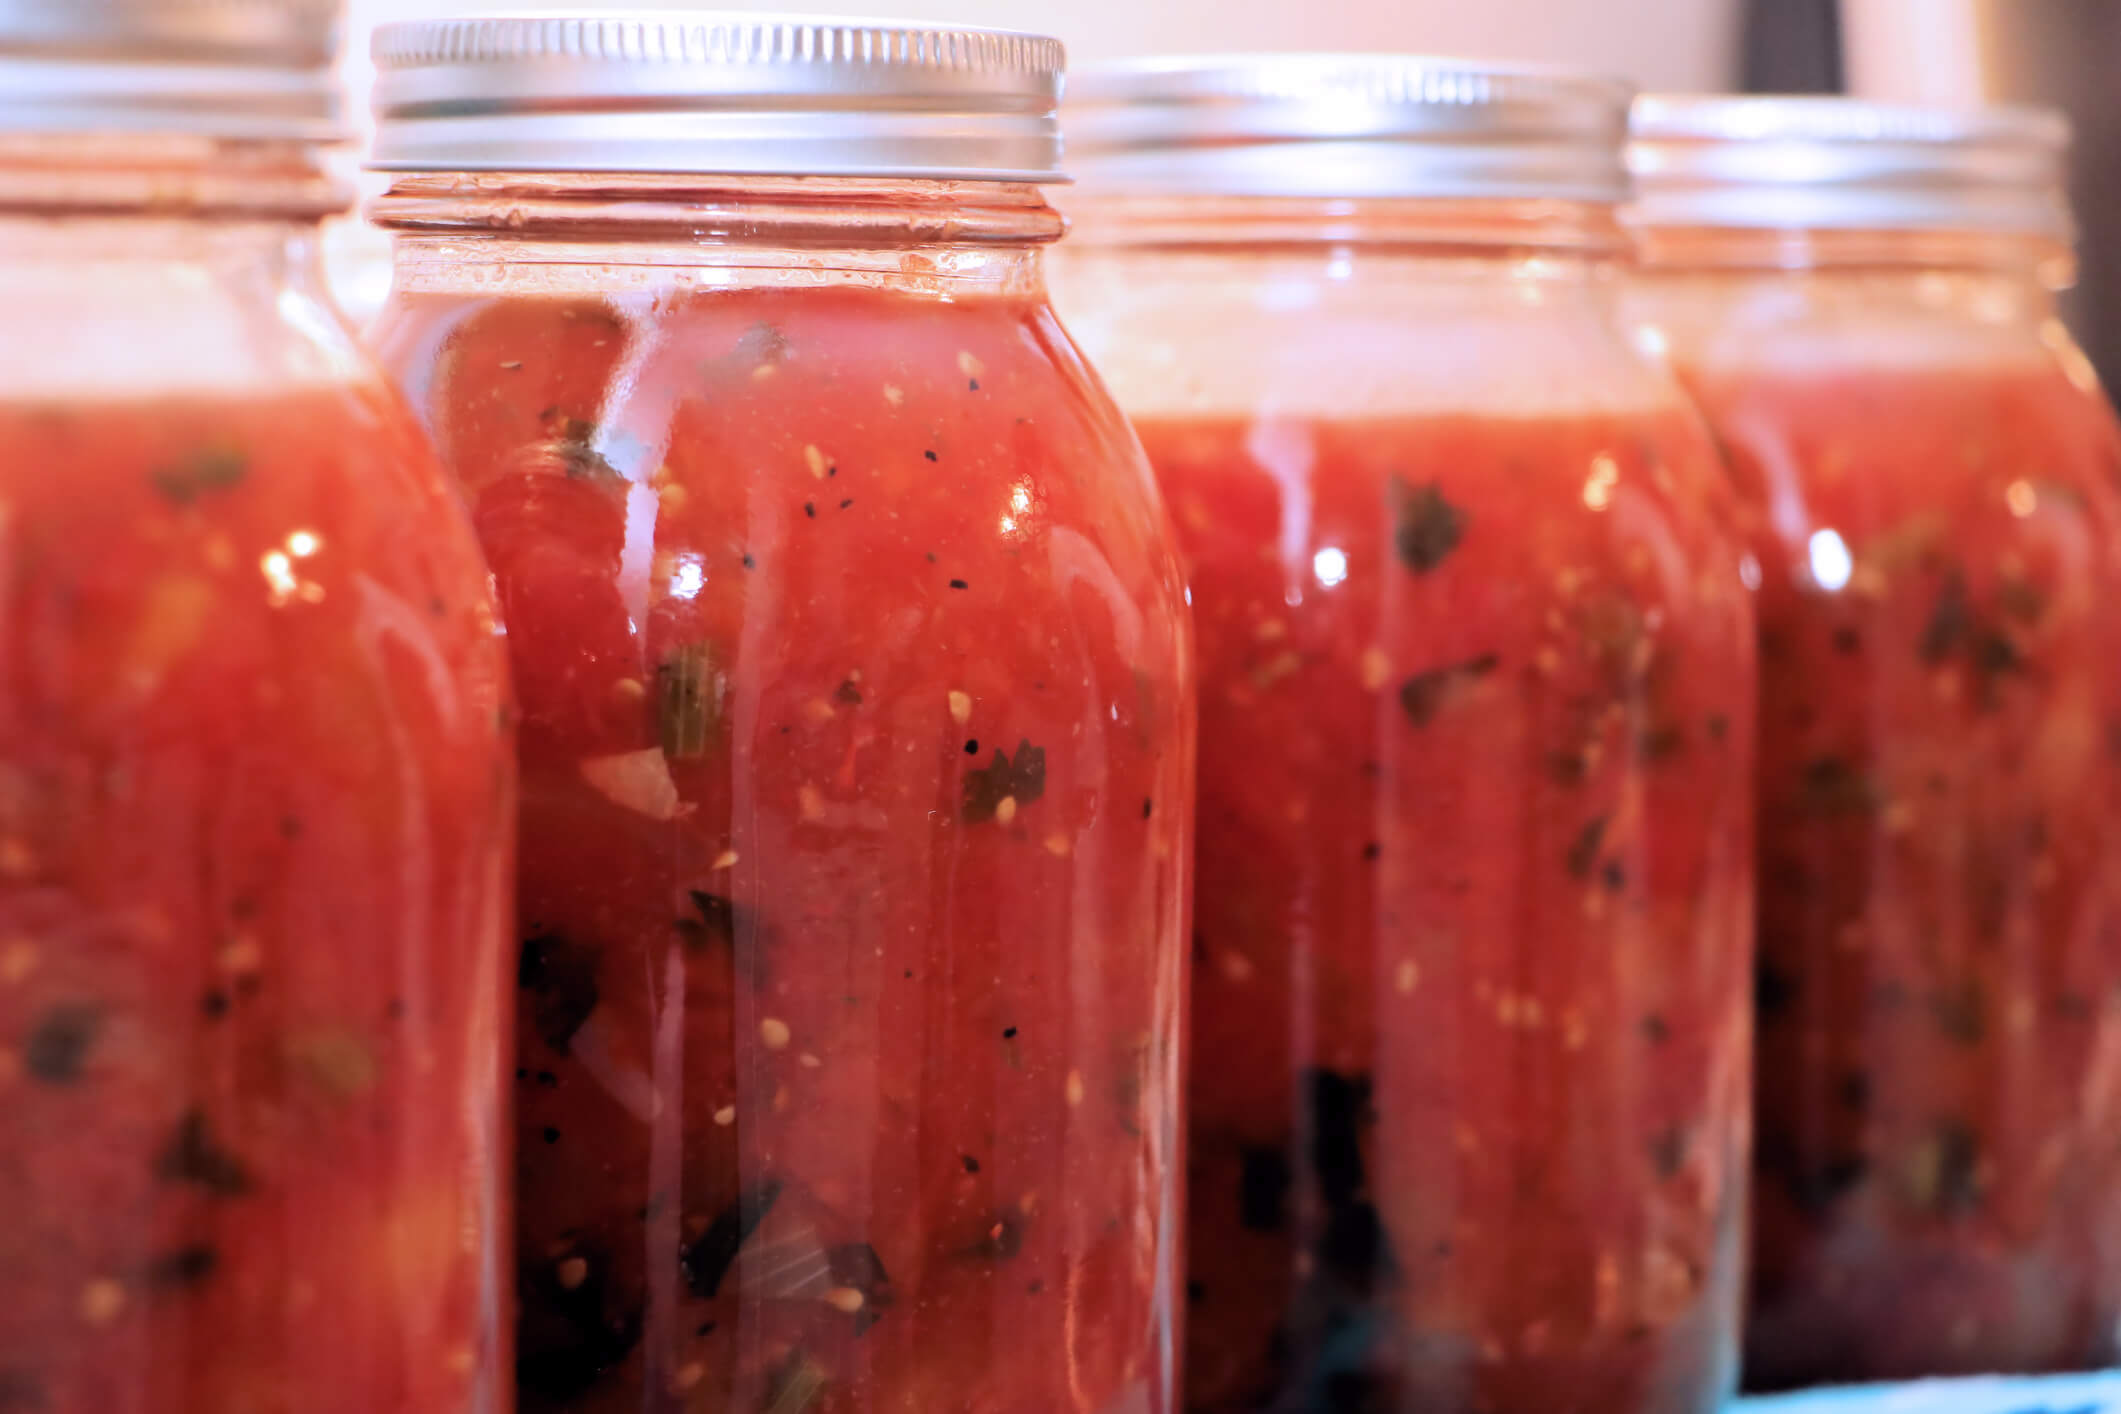 Foodborne botulism can be prevented with proper canning techniques and equipment that prevent contamination, according to UGA Extension food safety specialist Carla Schwan.